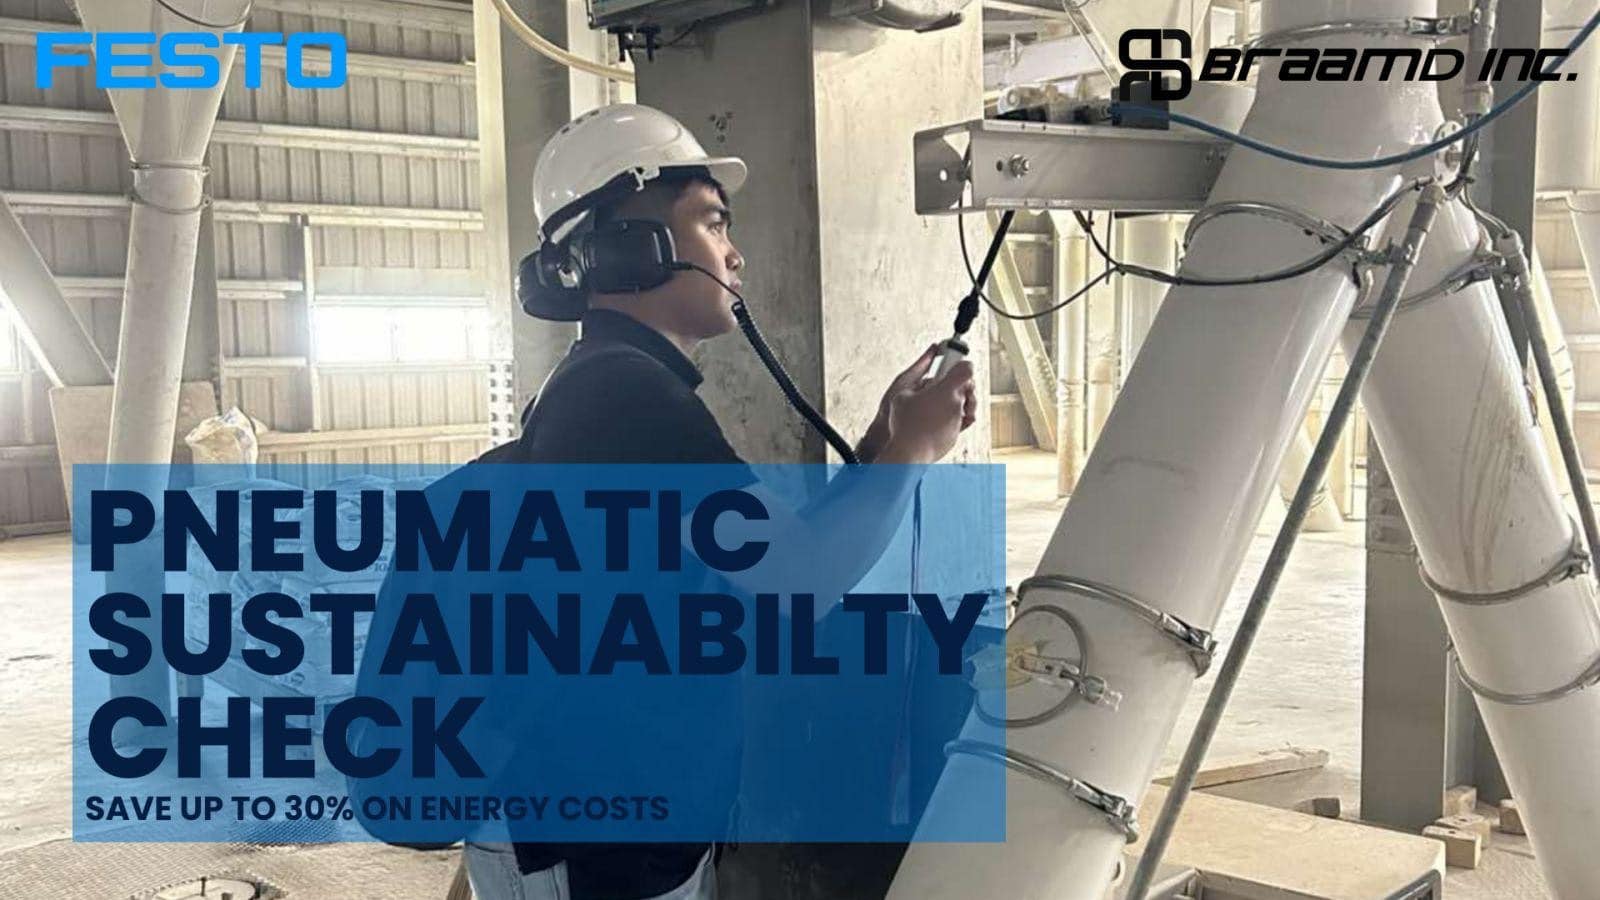 Pneumatic Sustainability Check: Are You Ready to Save? Are You Ready to Go Green?